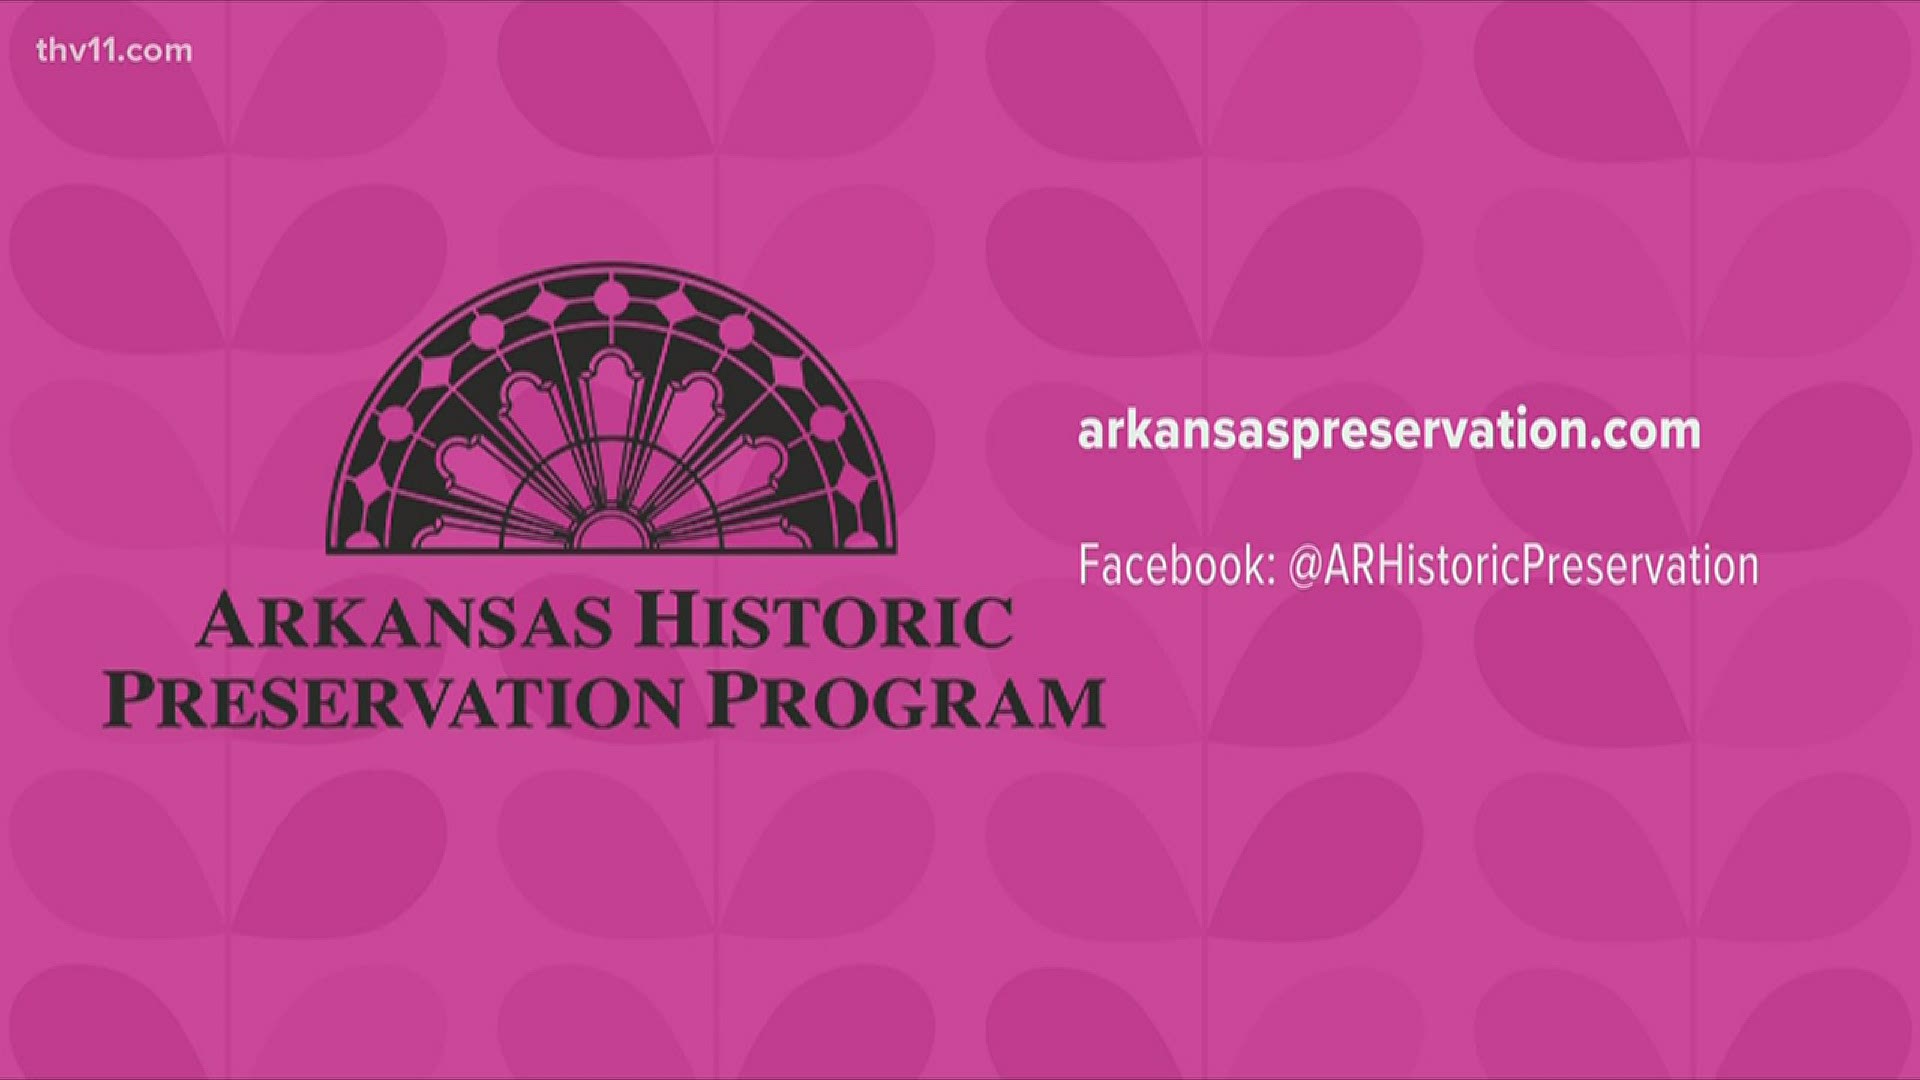 The Arkansas Historic Preservation Program has lots of fun events happening in June for history buffs.